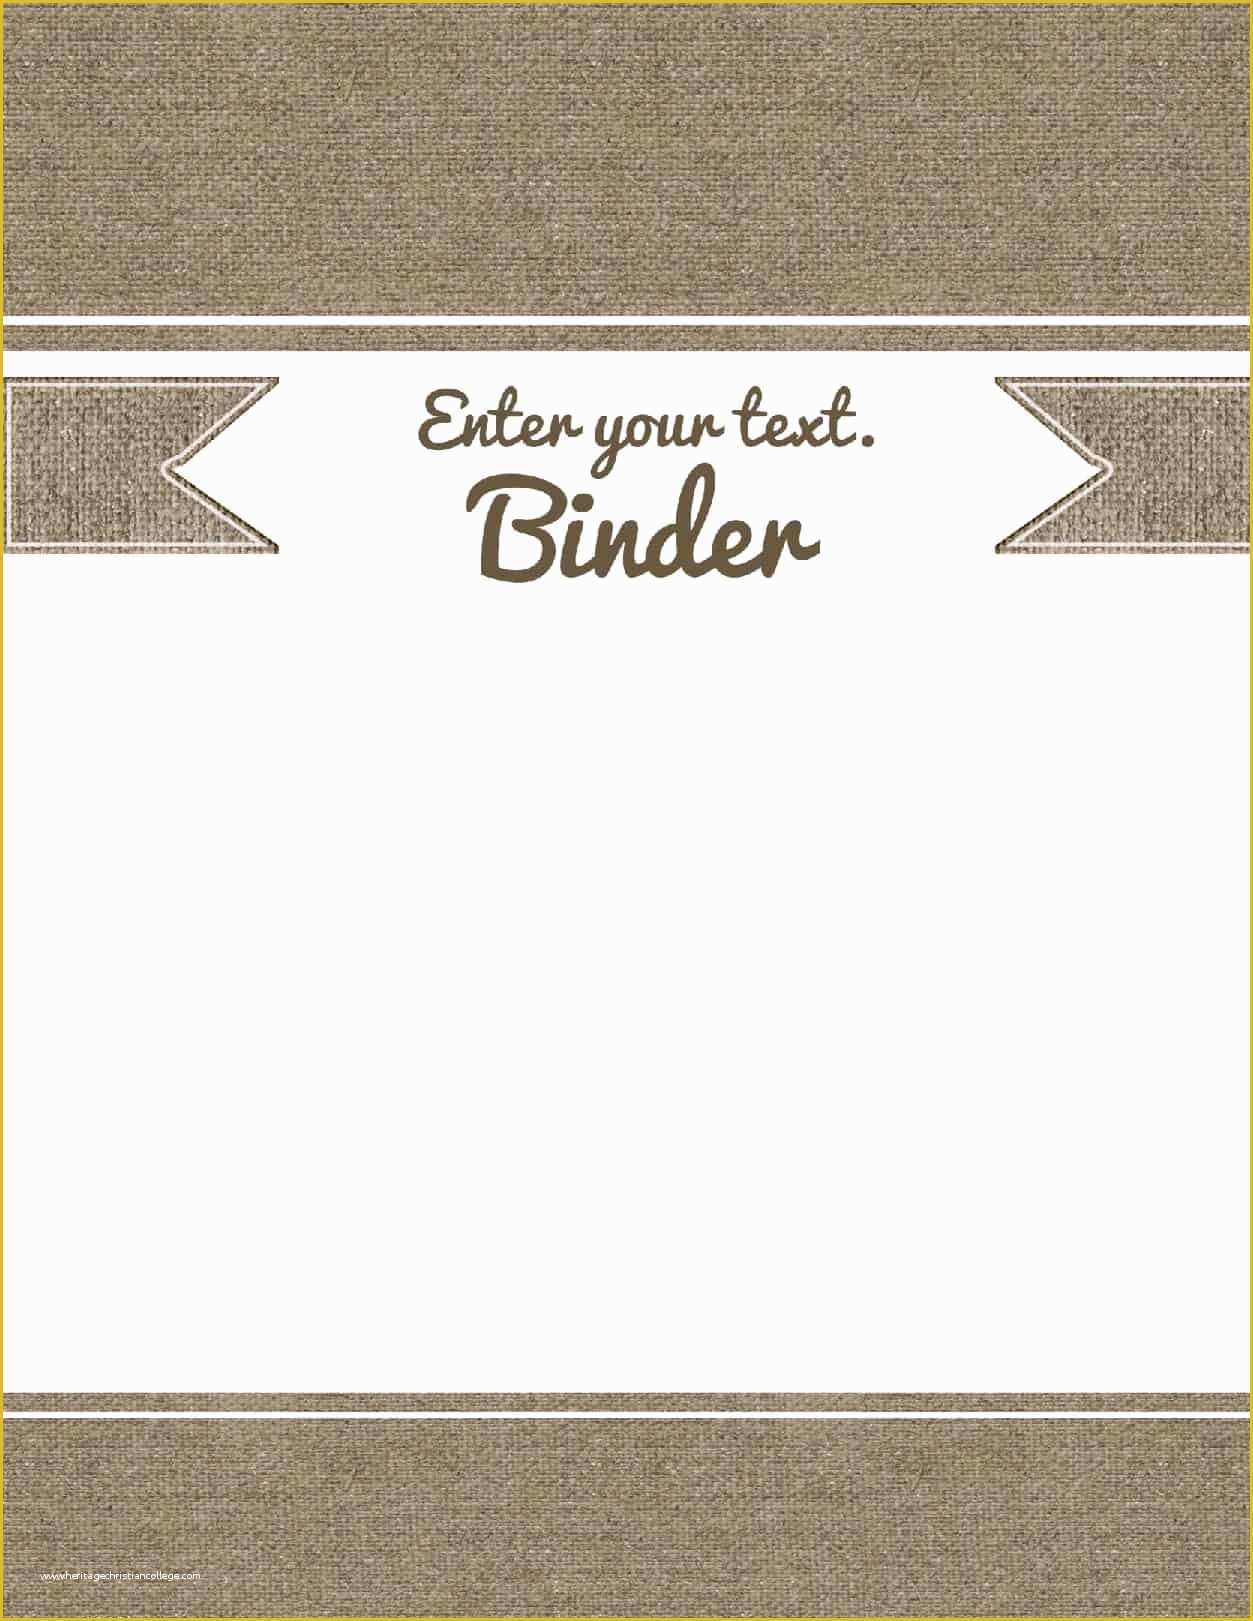 Free Binder Cover Templates Of Free Binder Cover Templates